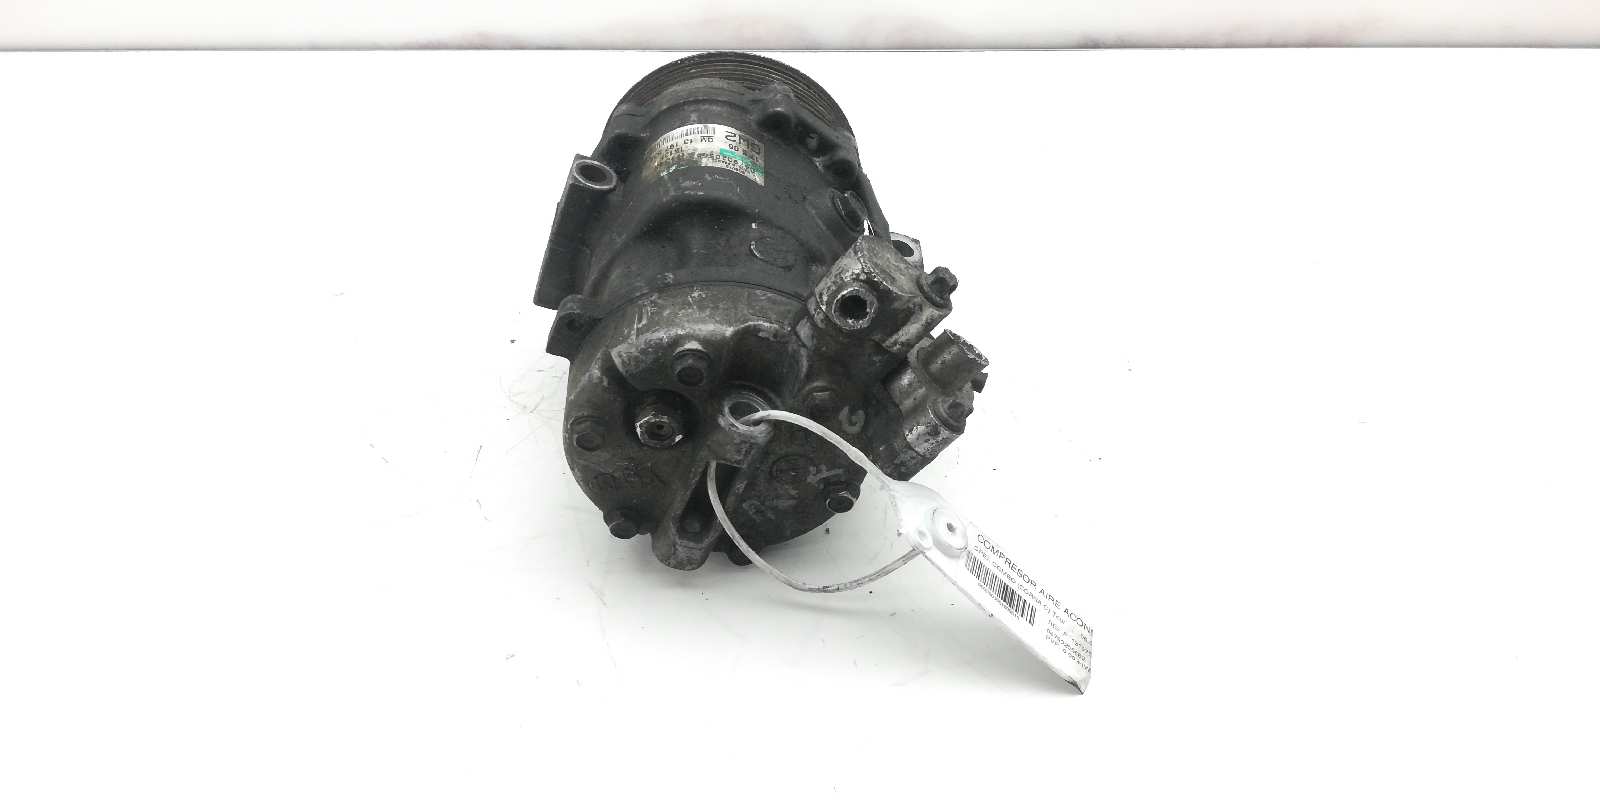 OPEL Combo C (2001-2011) Air Condition Pump 13197538, 06790205662 18495418